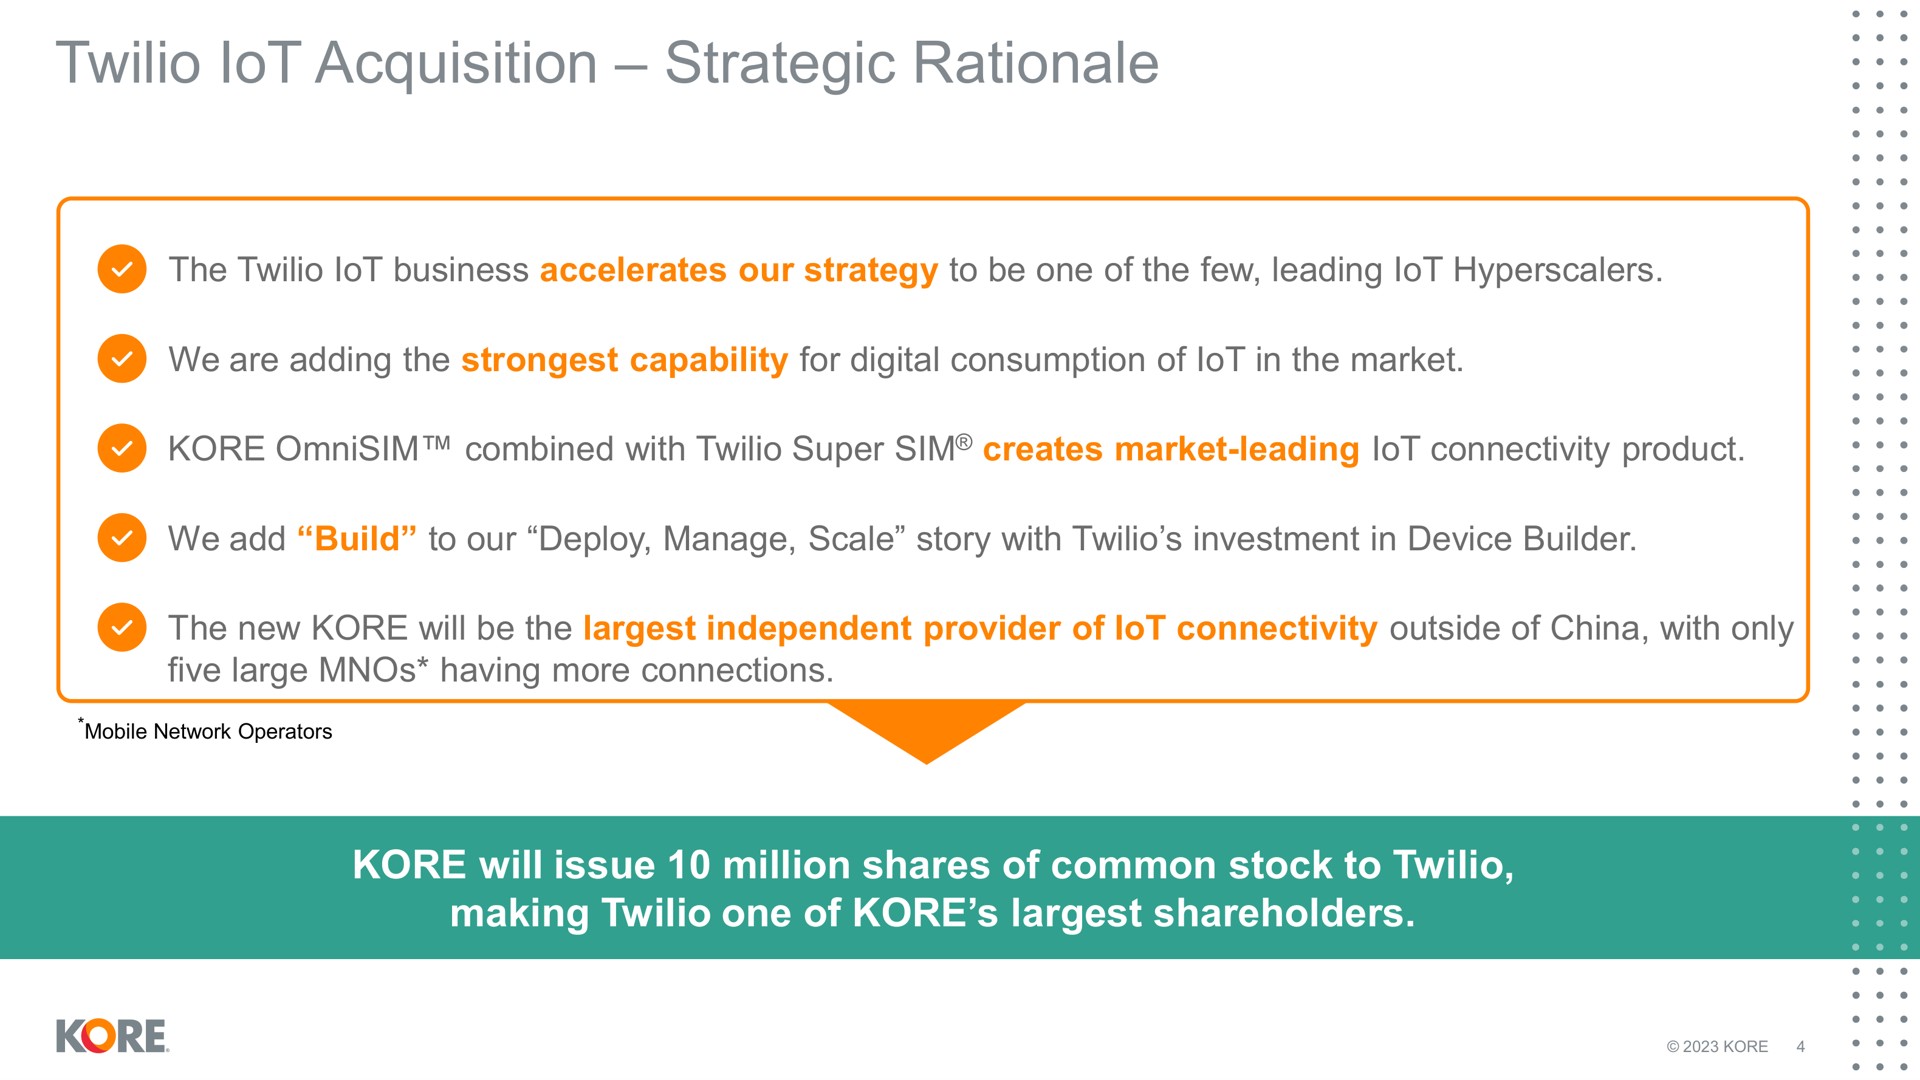 acquisition strategic rationale making one of kore shareholders | Kore